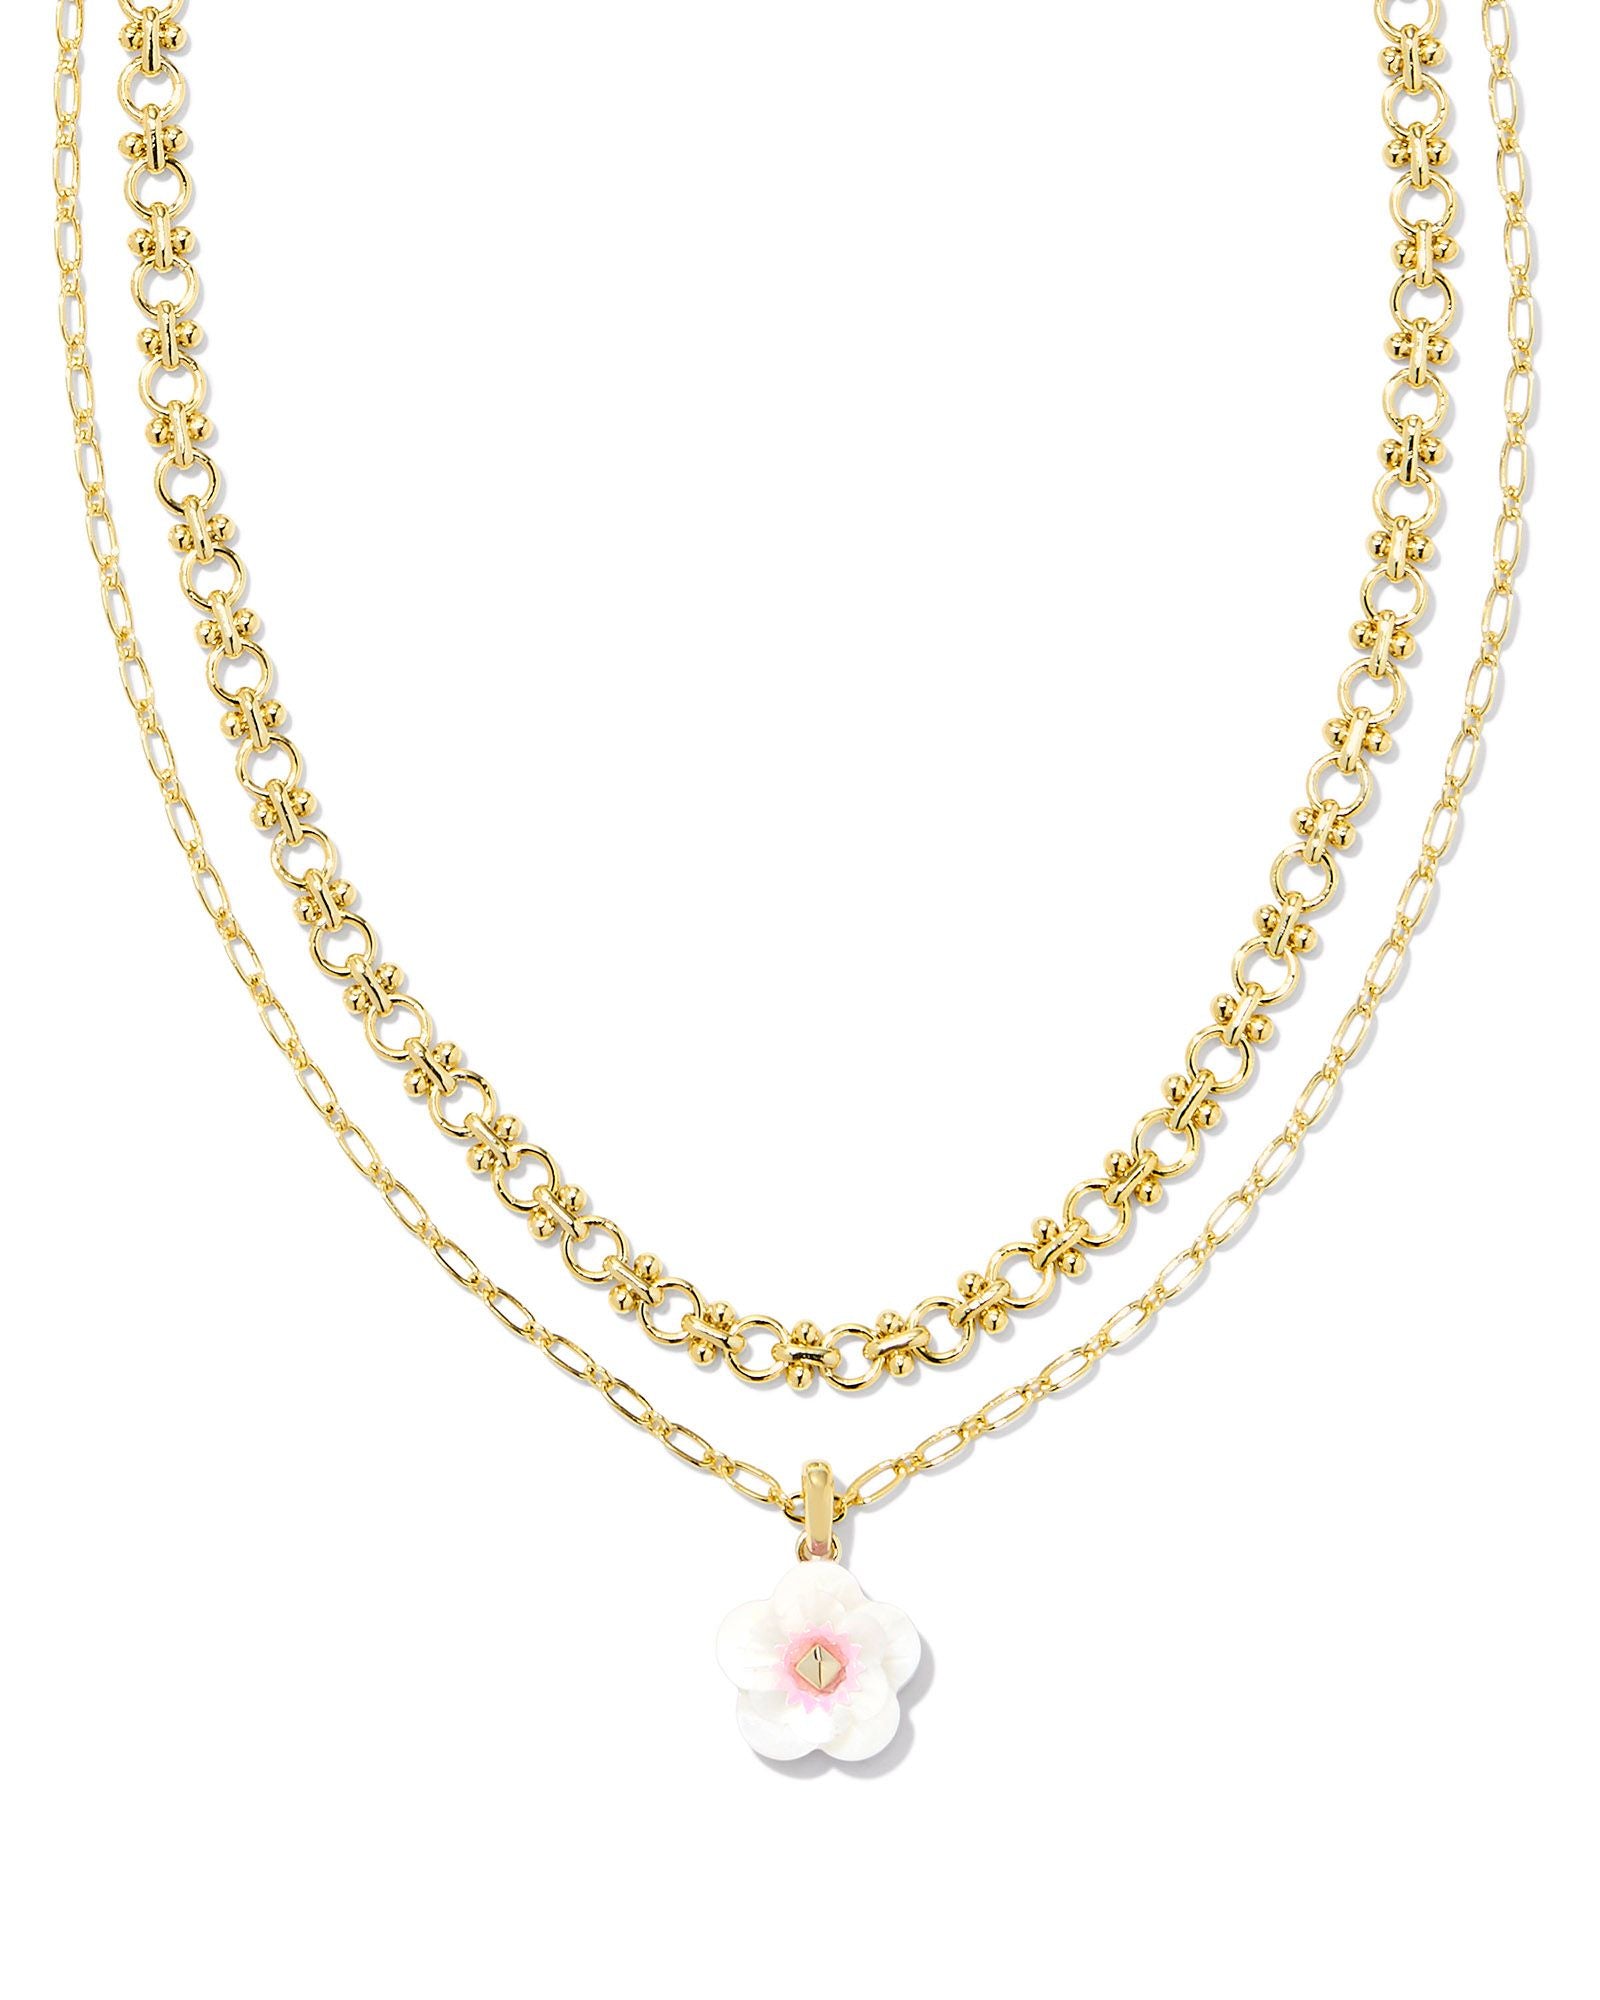 Deliah Gold Multi Strand Necklace Iridescent Pink White Mix